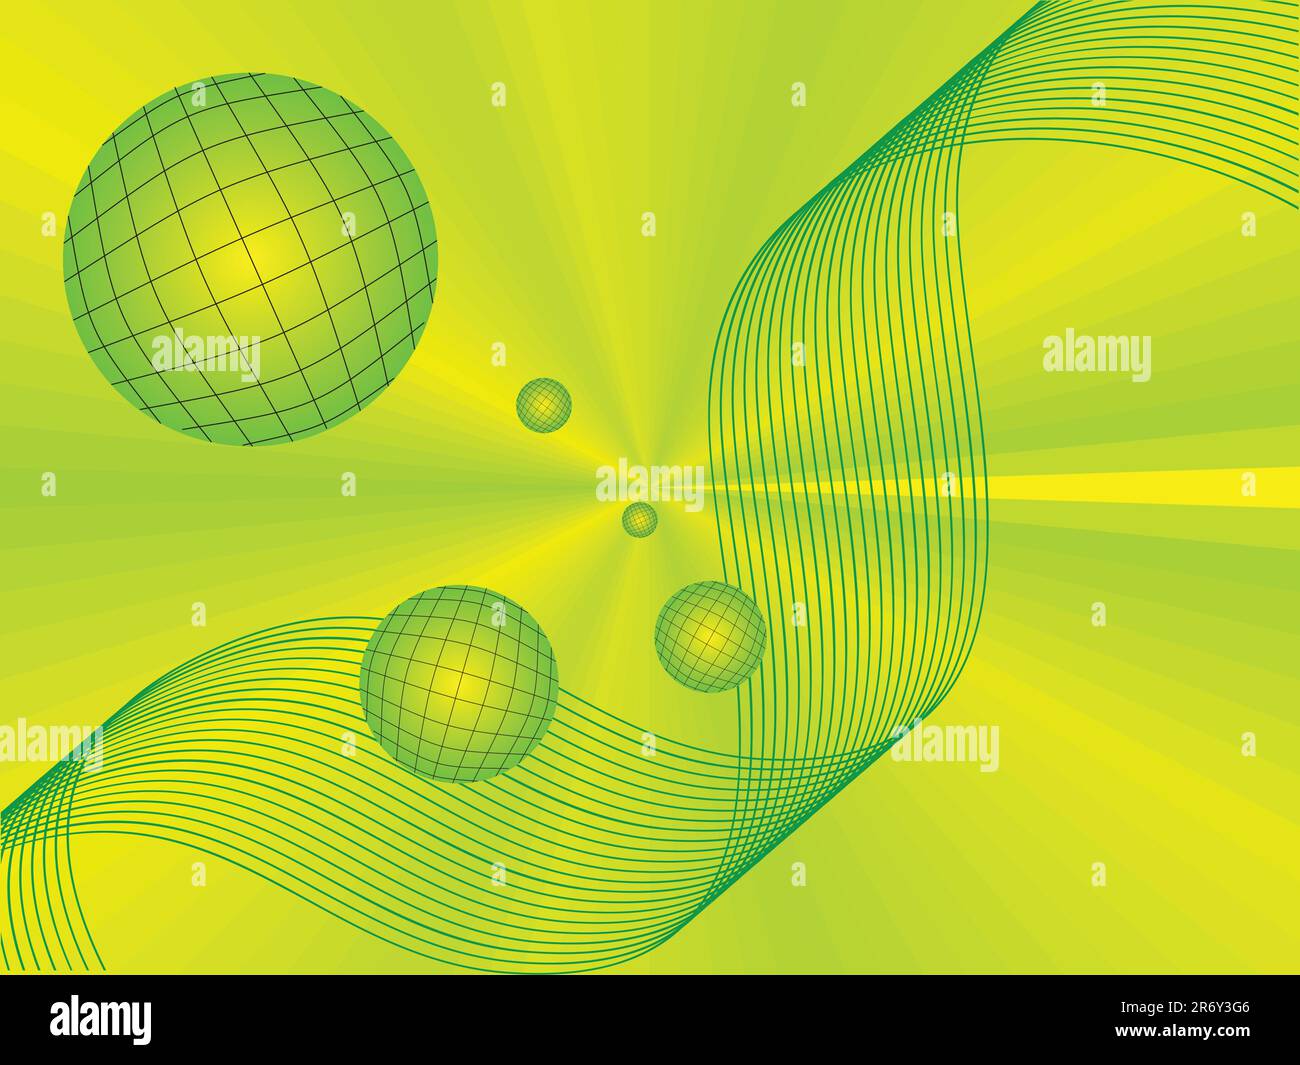 vector illustration of a green spheres and waves Stock Vector